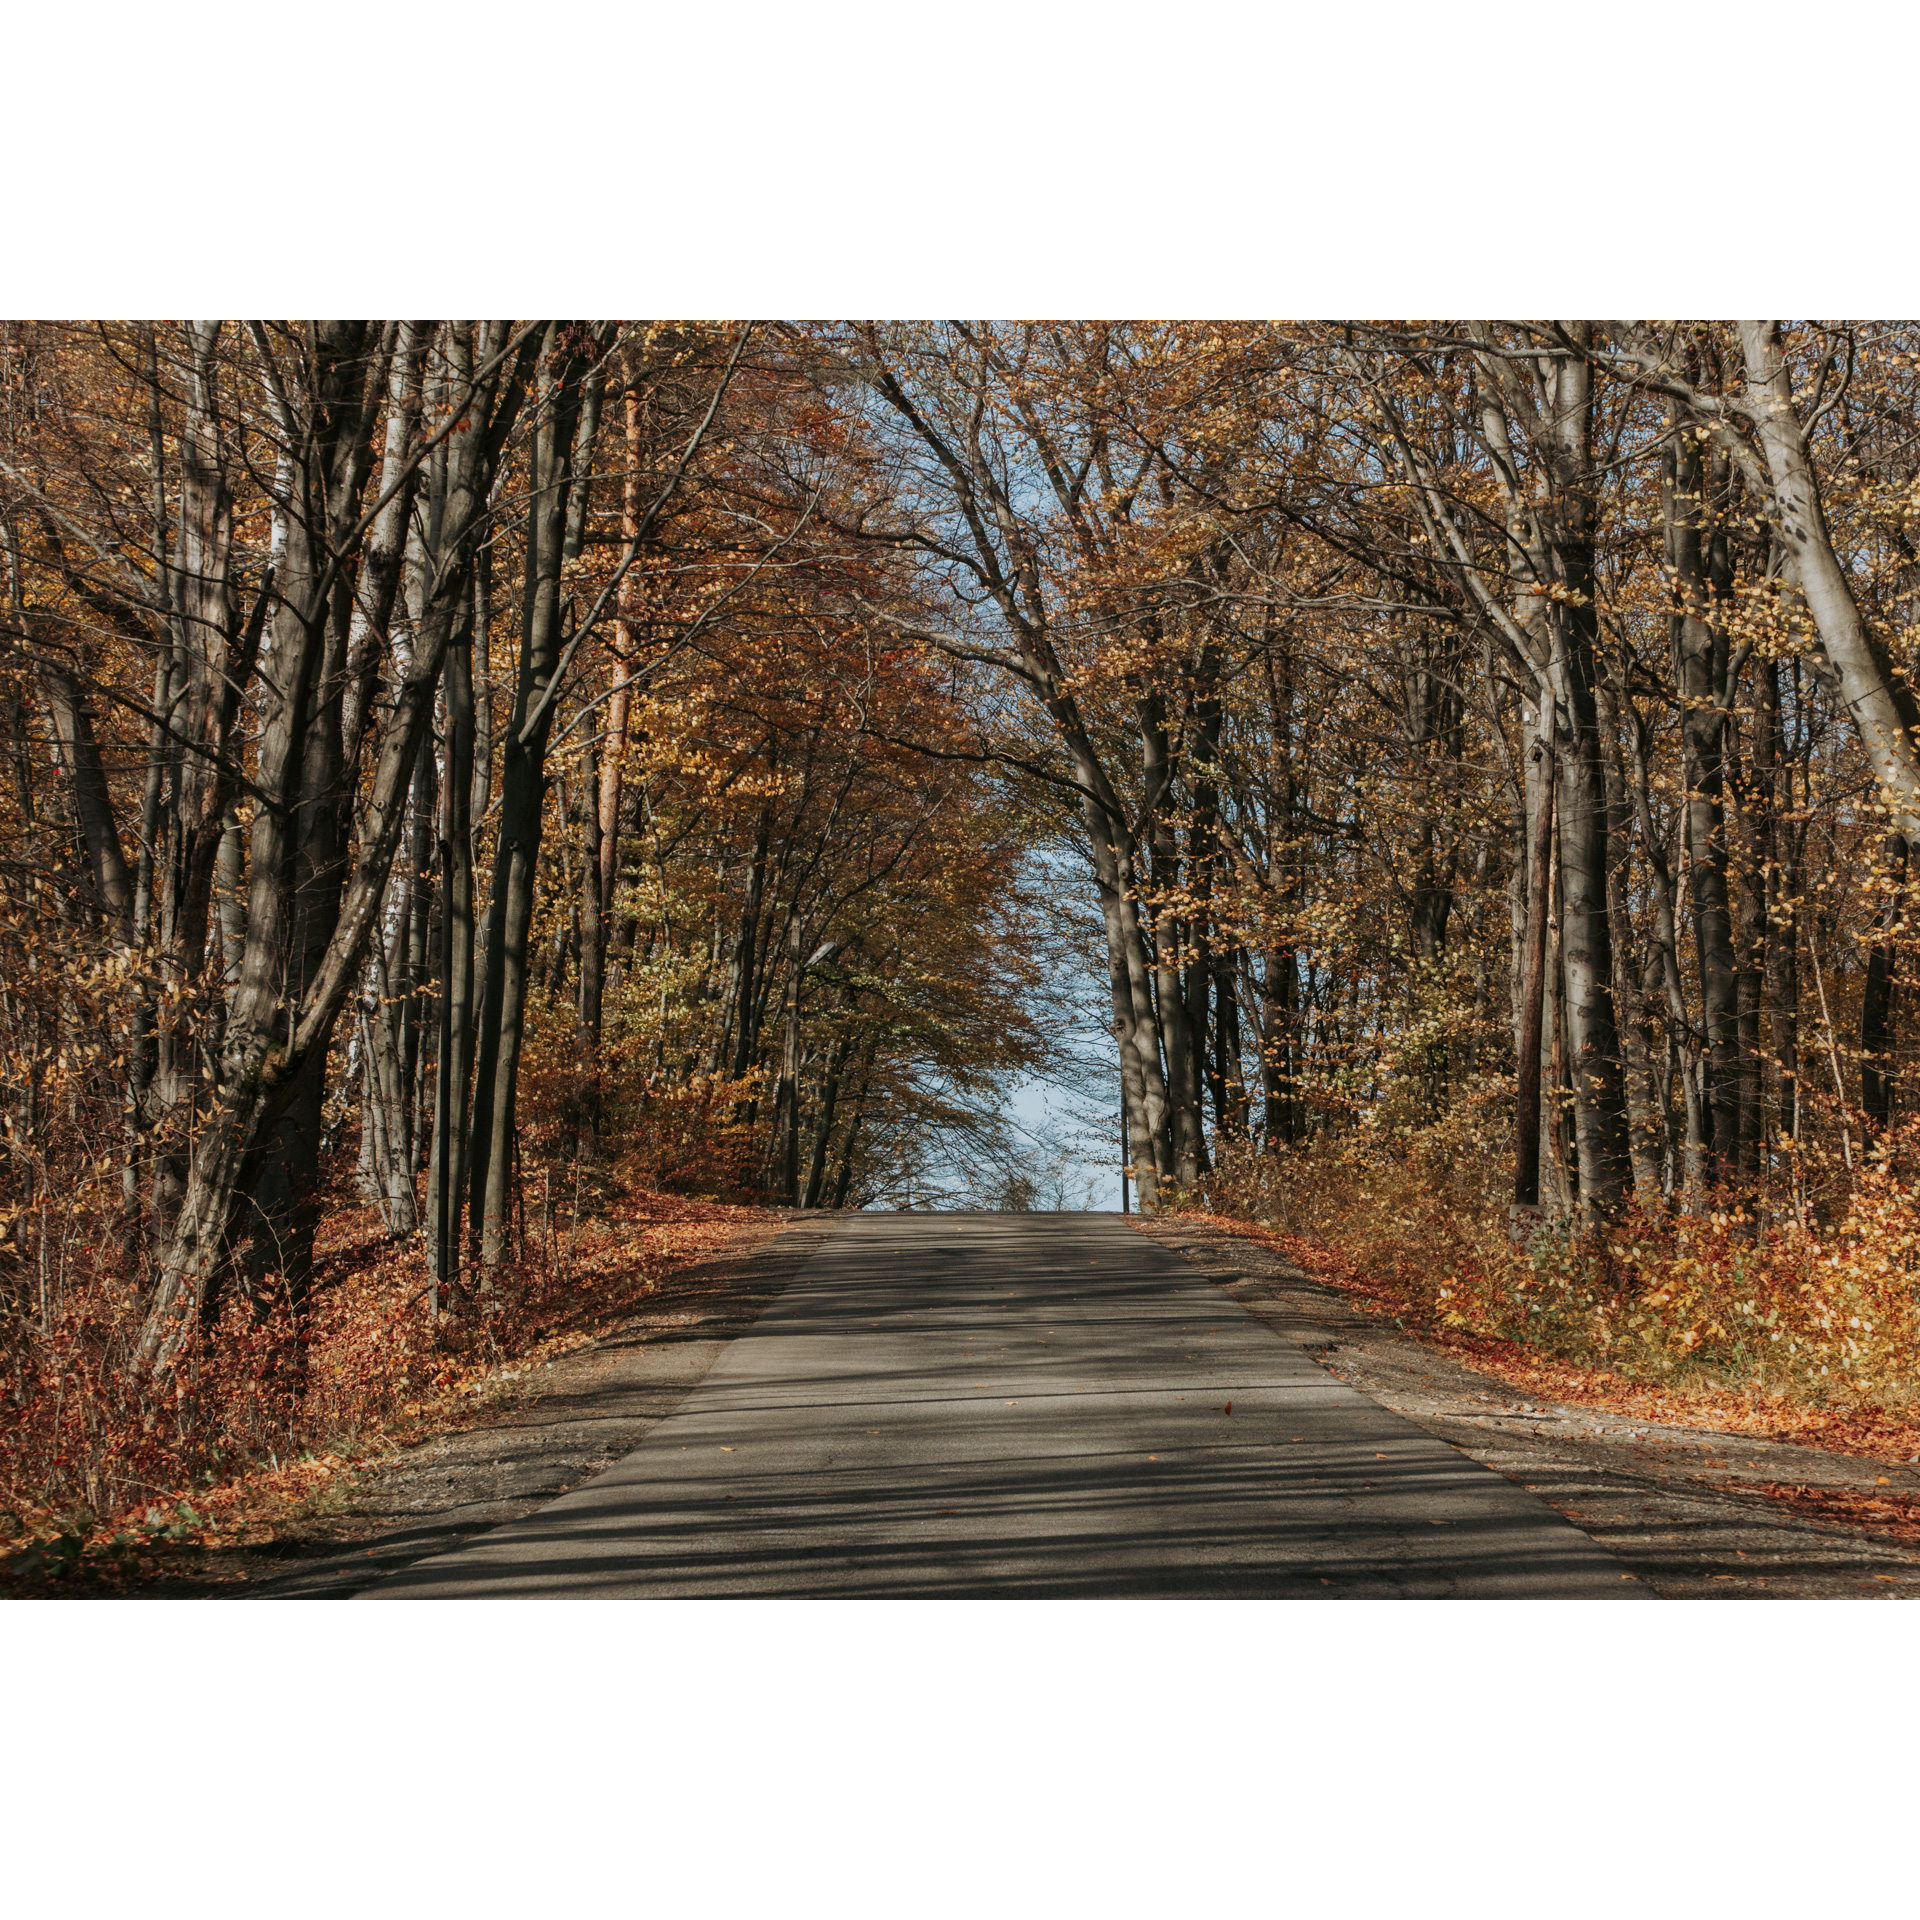 Asphalt road leading to a gentle hill among autumn trees with orange leaves